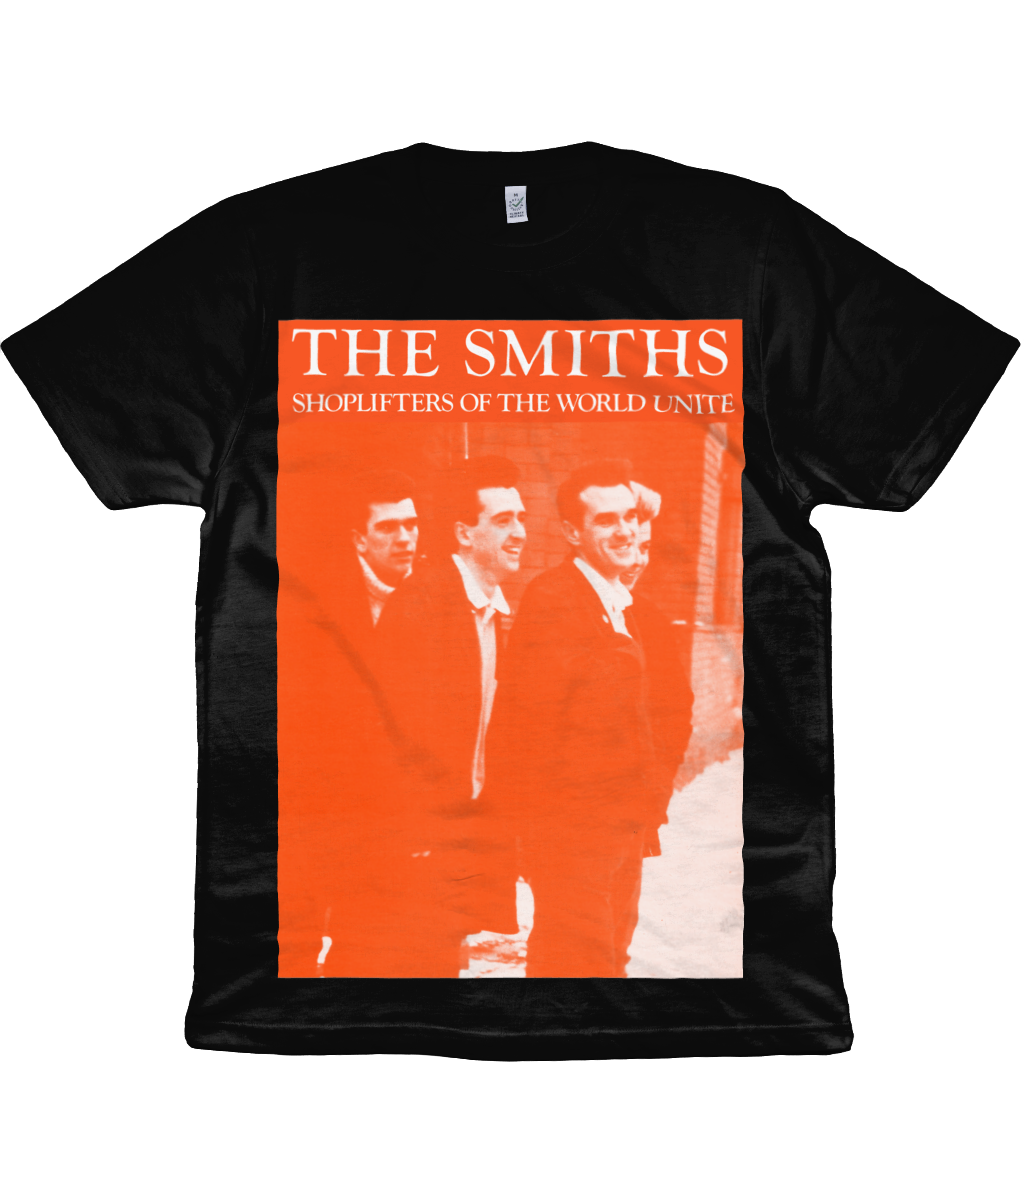 THE SMITHS - SHOPLIFTERS OF THE WORLD UNITE - 1987 - US PROMO